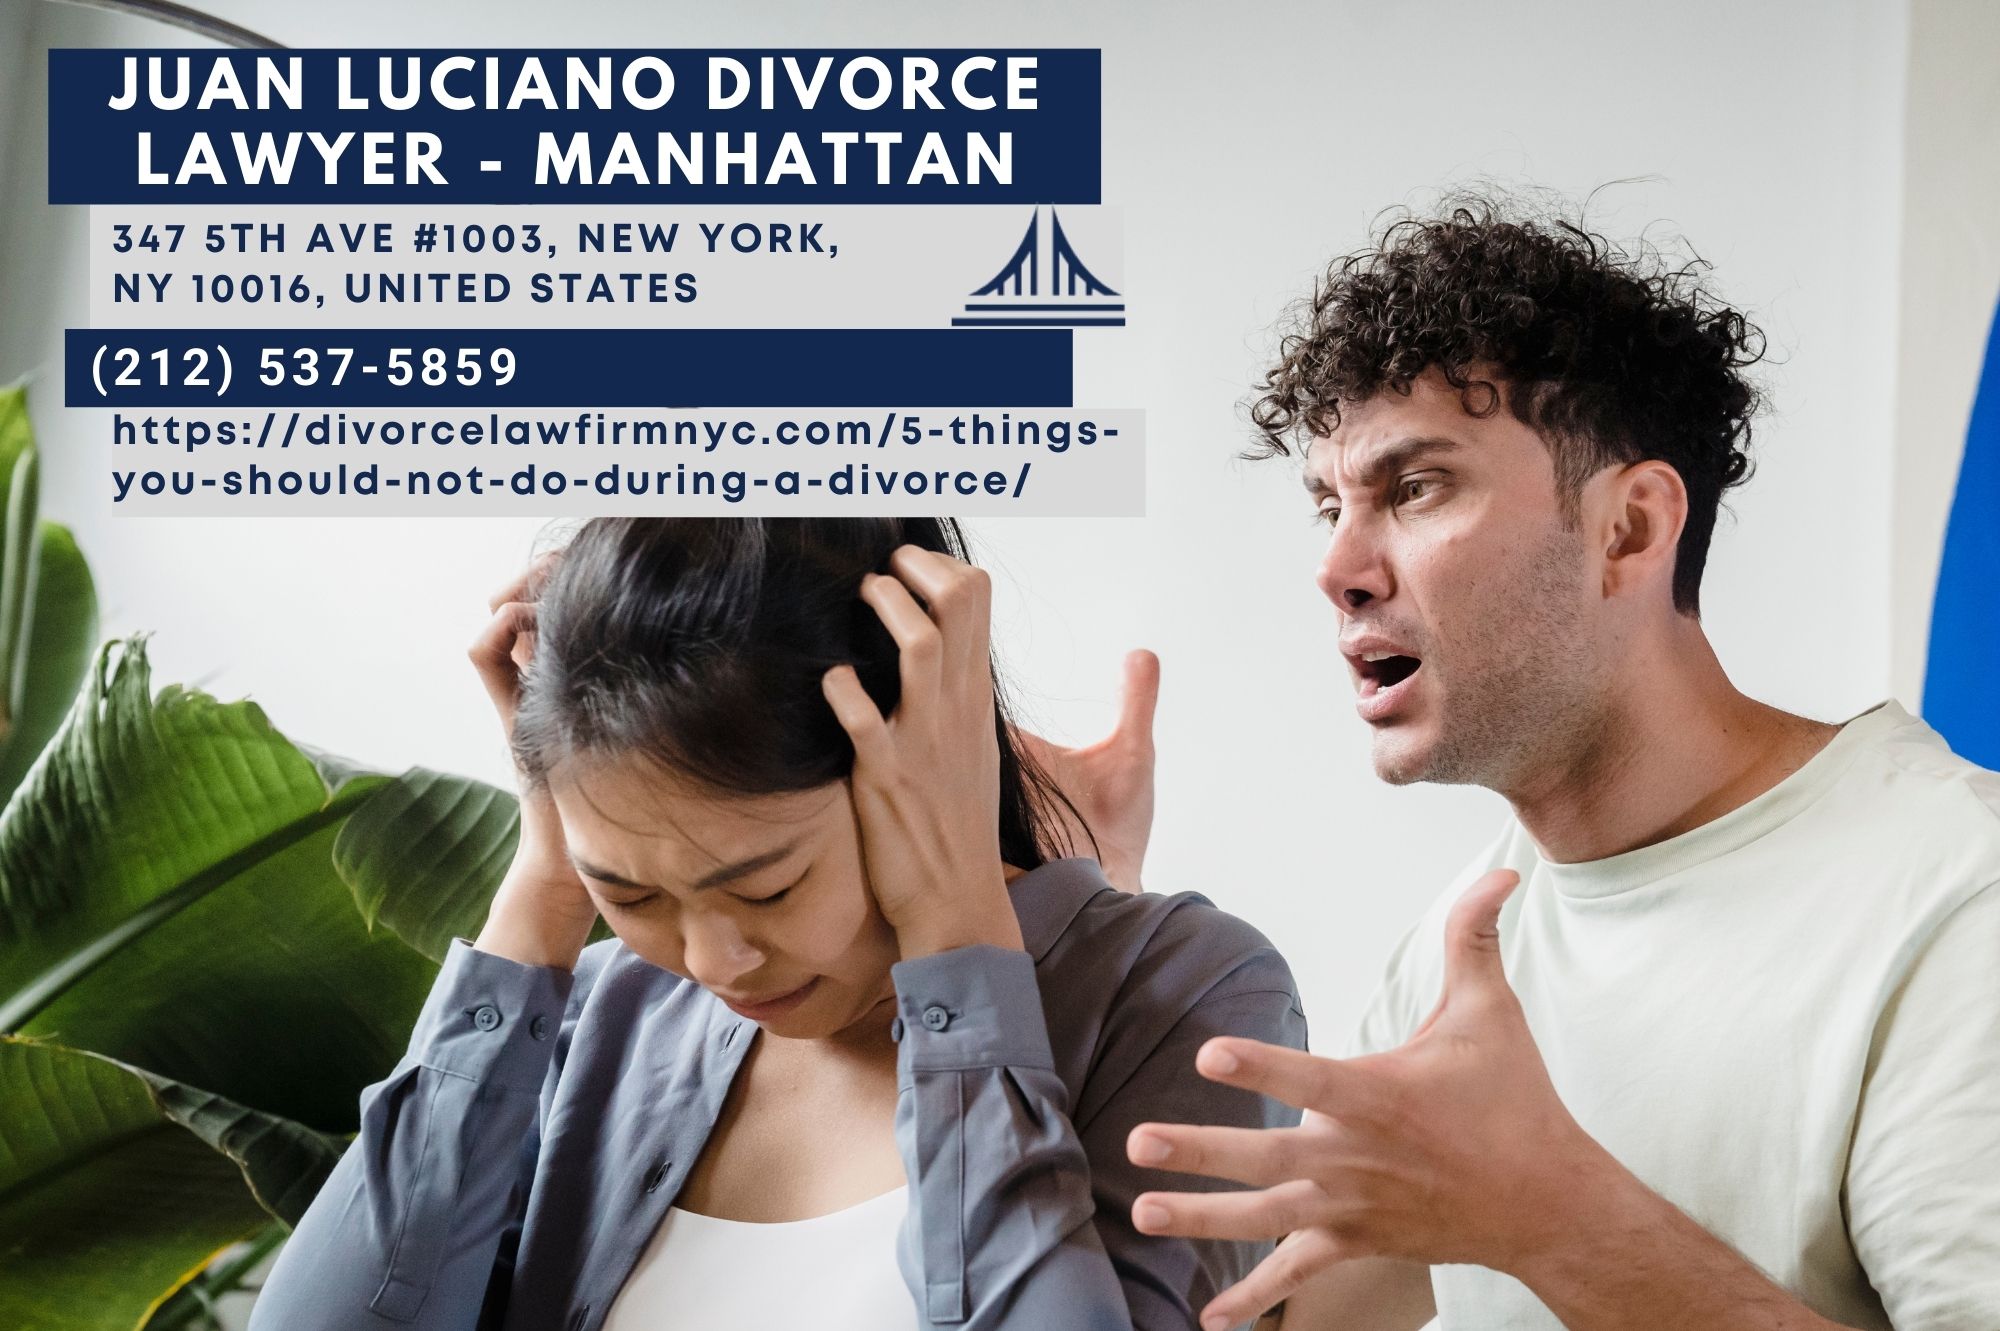 Juan Luciano, Prominent New York City Divorce Lawyer, Releases Groundbreaking Article on Crucial Divorce Missteps